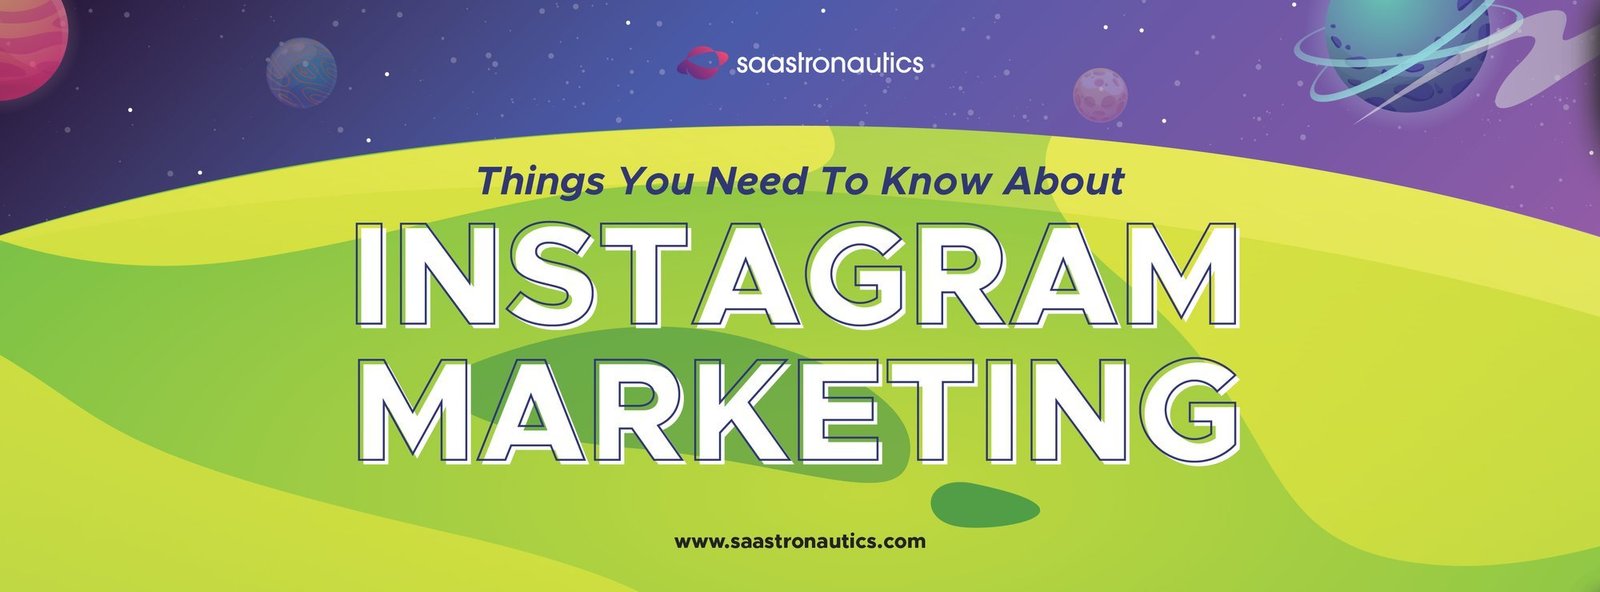 Things You Need To Know About Instagram Marketing